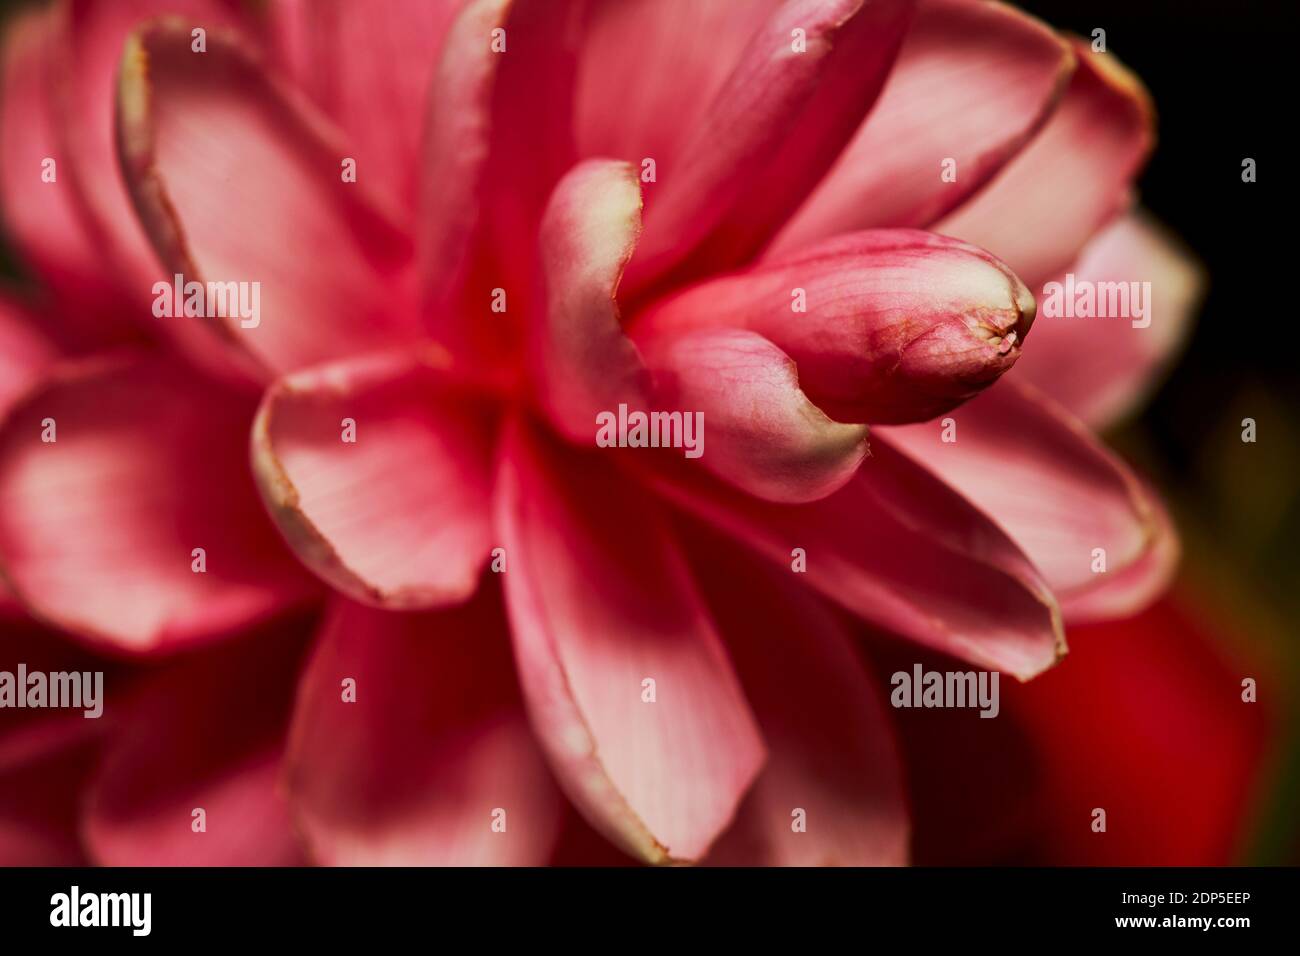 Close up of the petals of a pink Hawaiian ginger plant with shallow depth of field Stock Photo